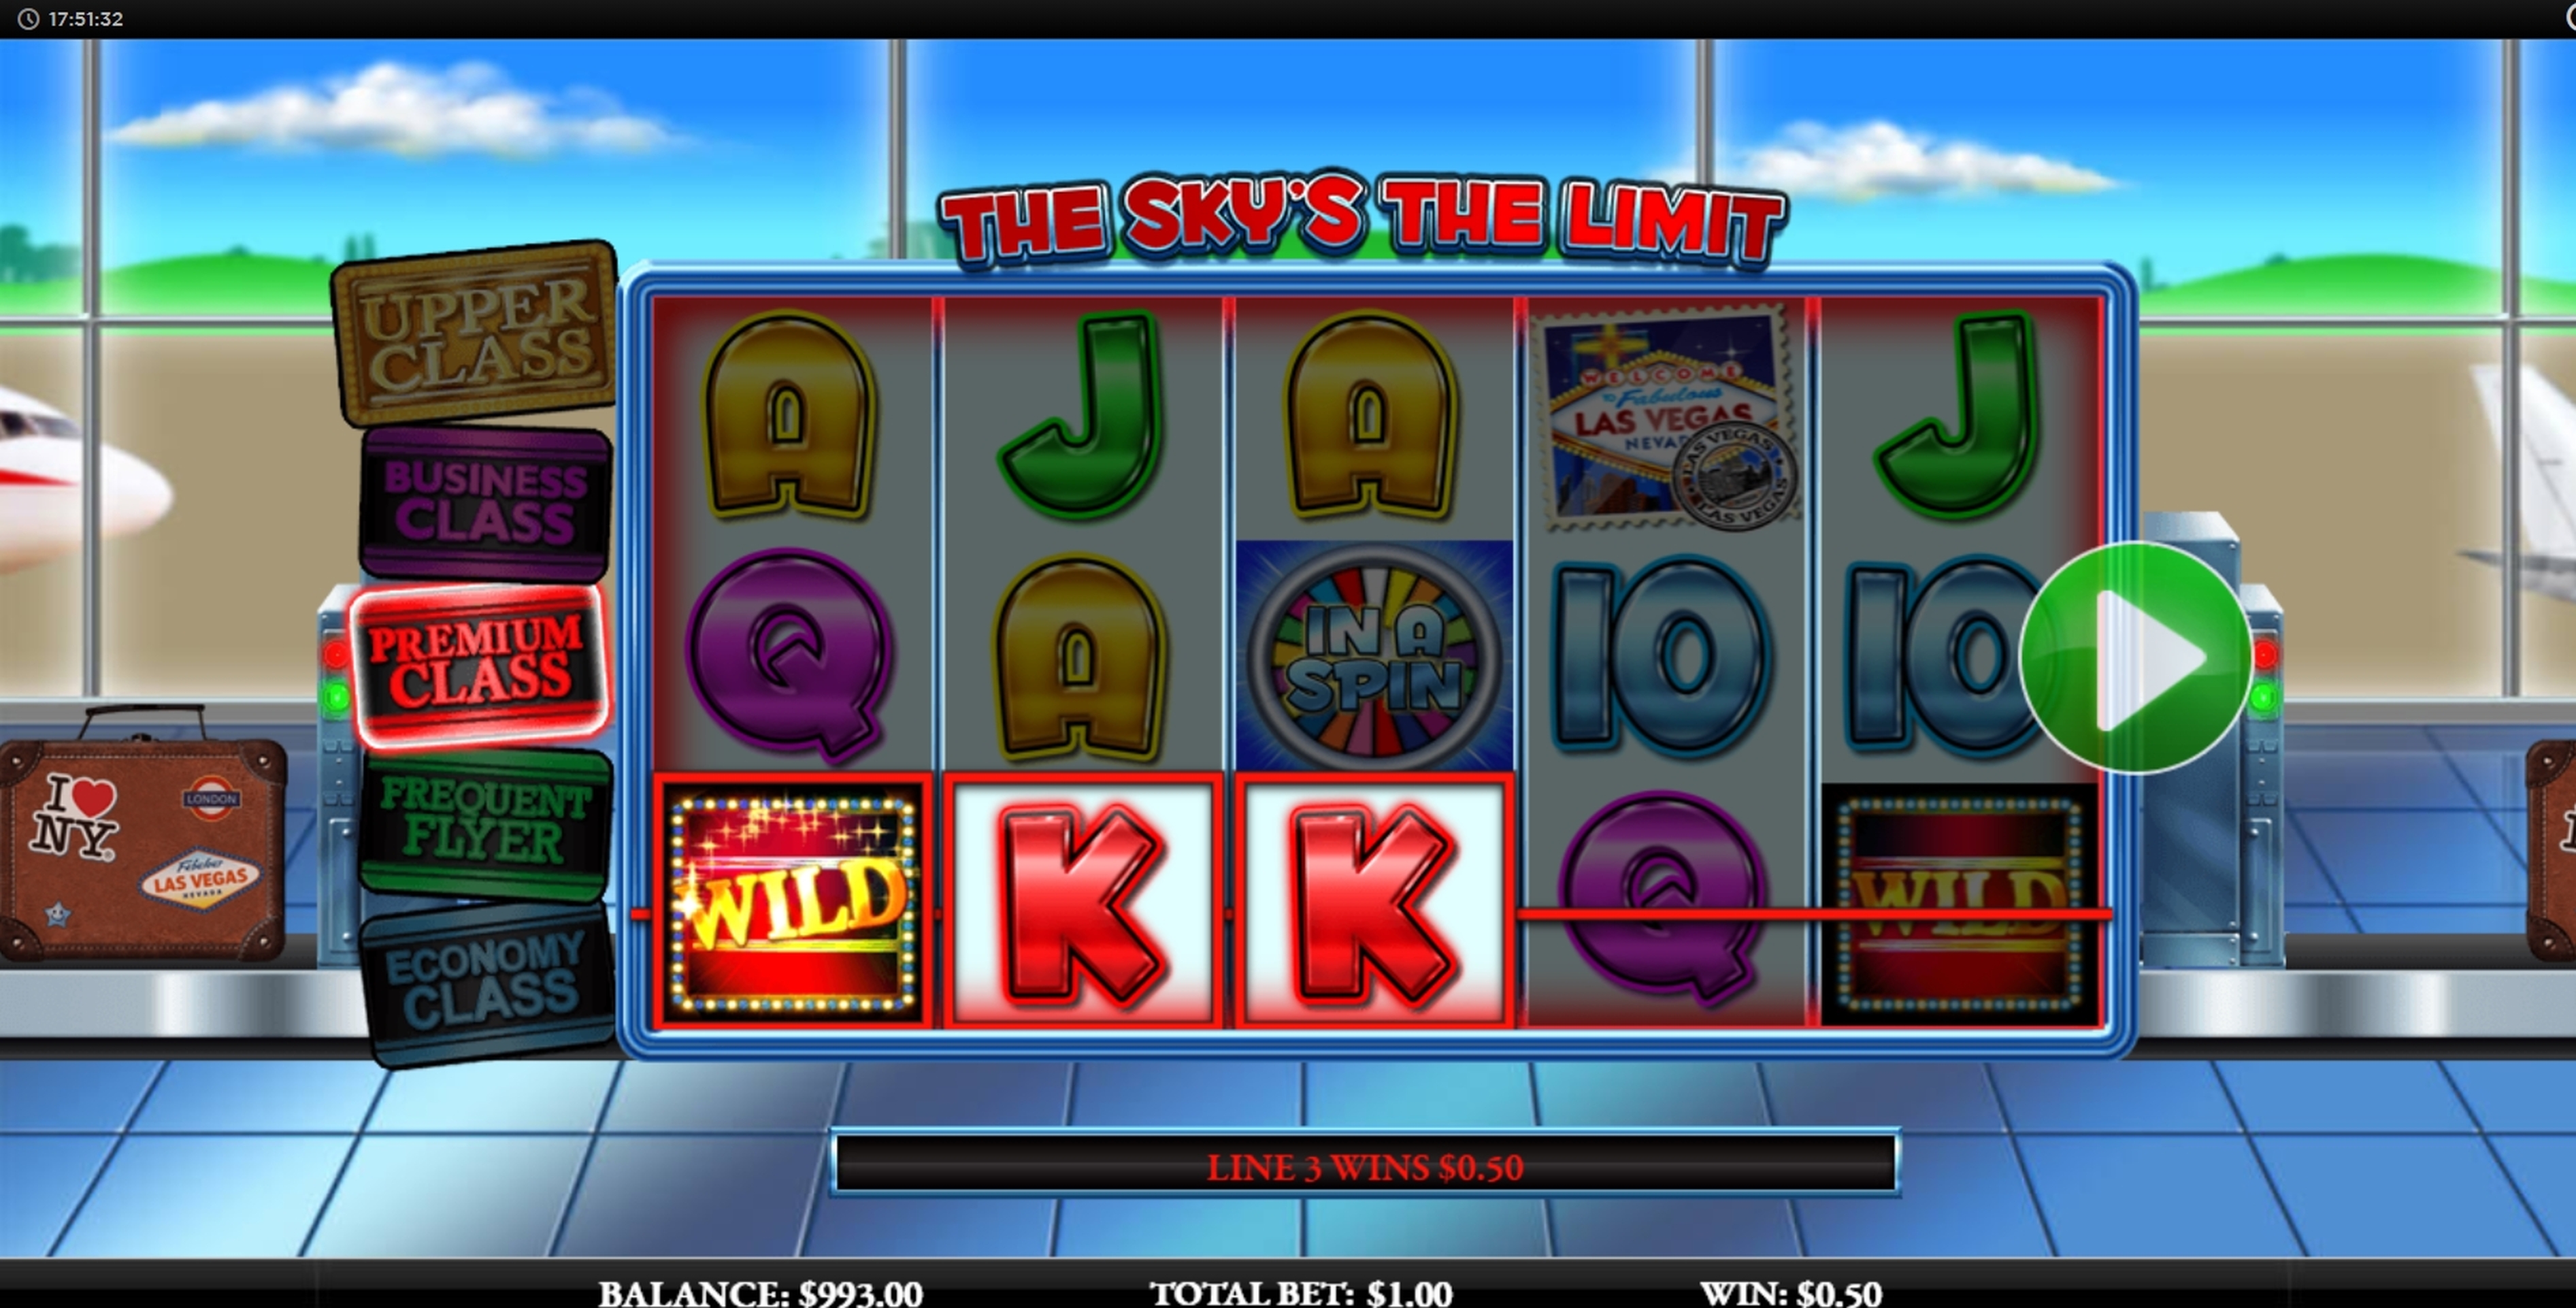 Win Money in The Sky's the Limit Free Slot Game by Live 5 Gaming